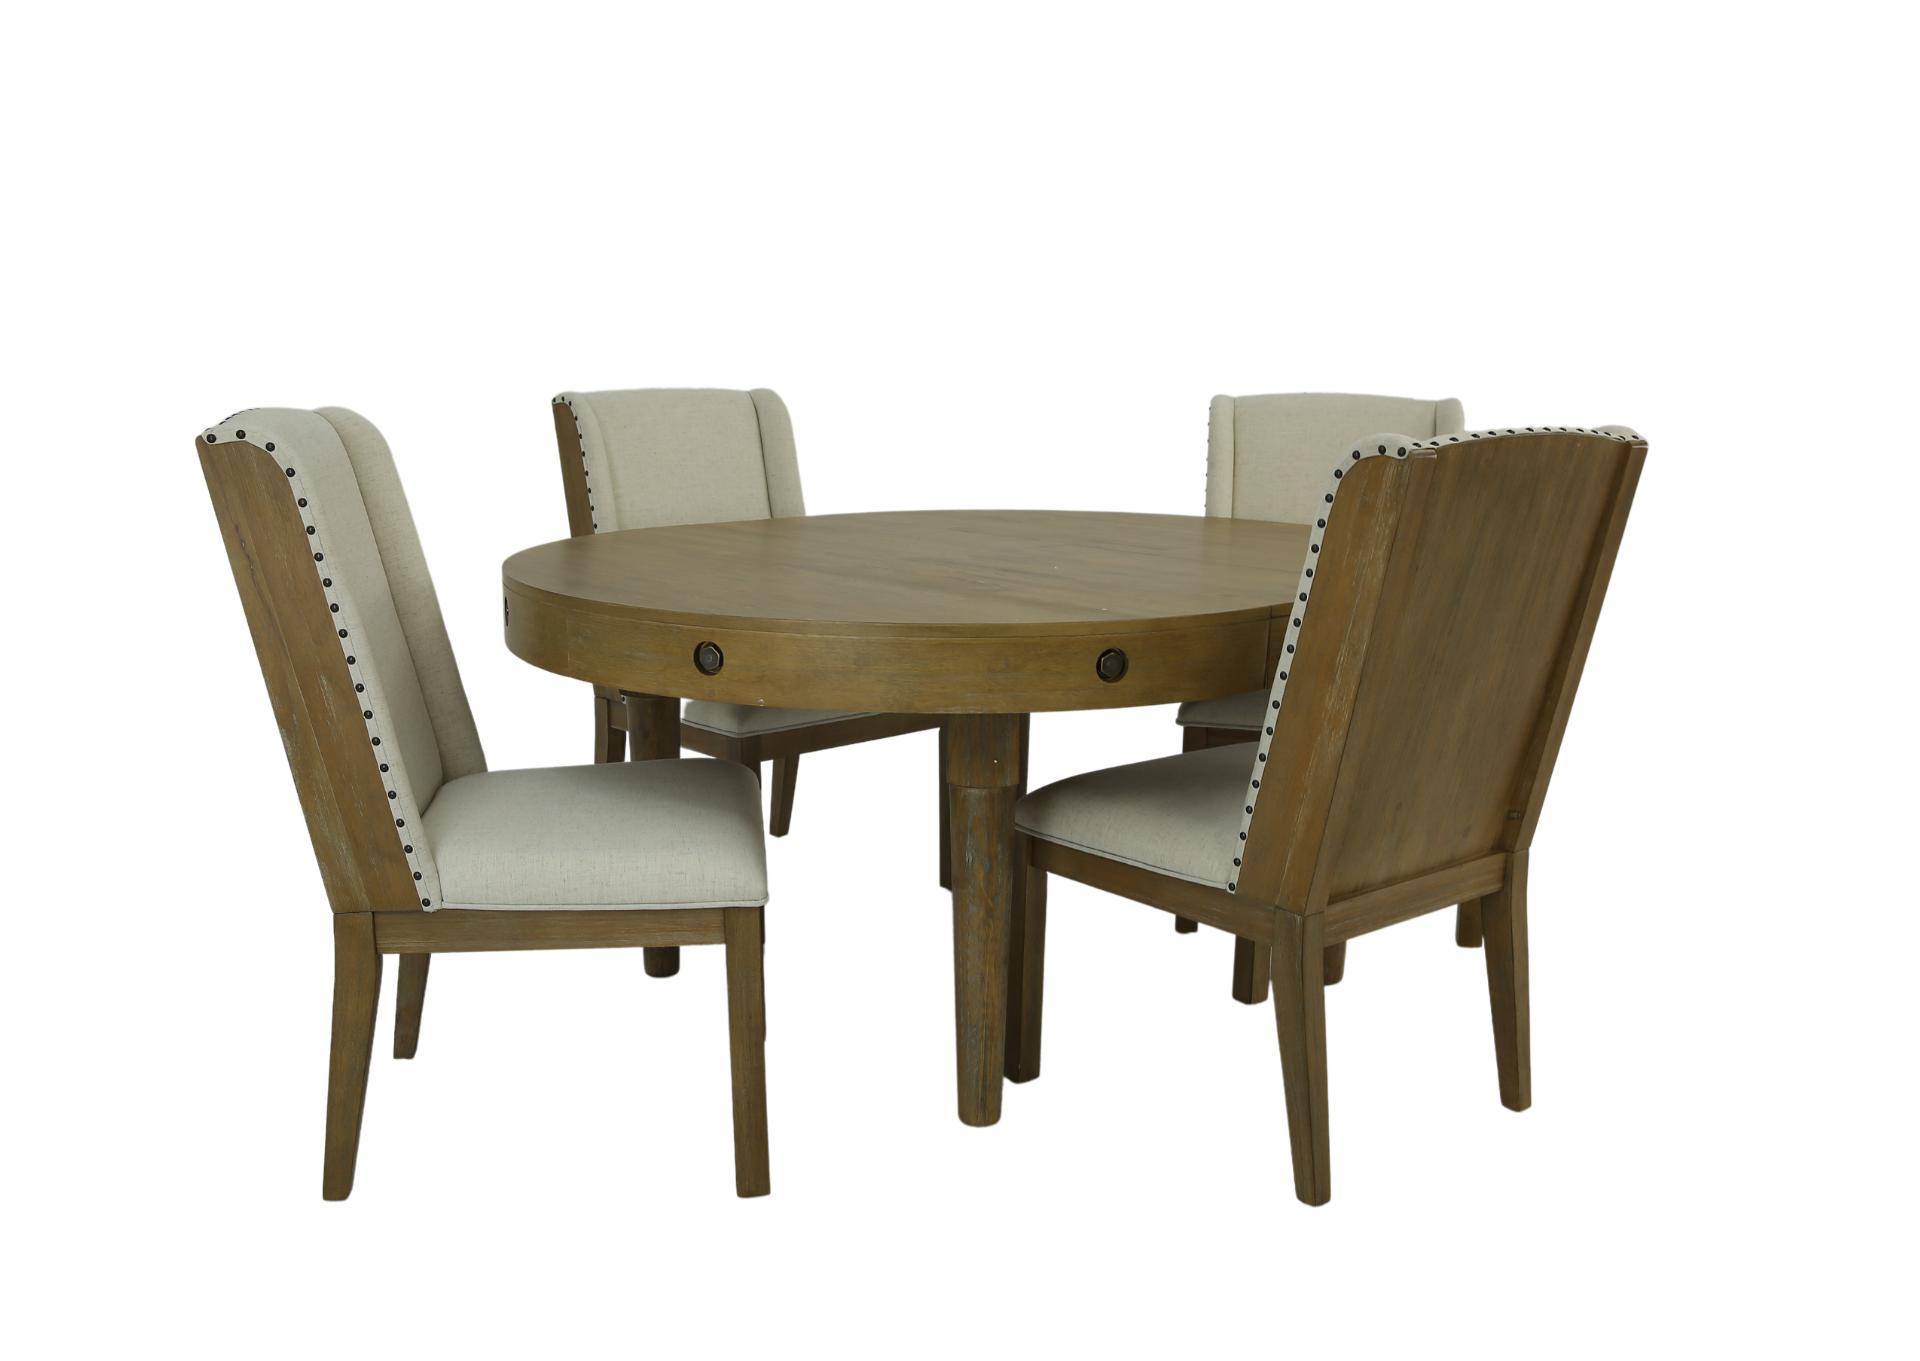 LYNNFIELD 5 PIECE DINING SET,MAGS